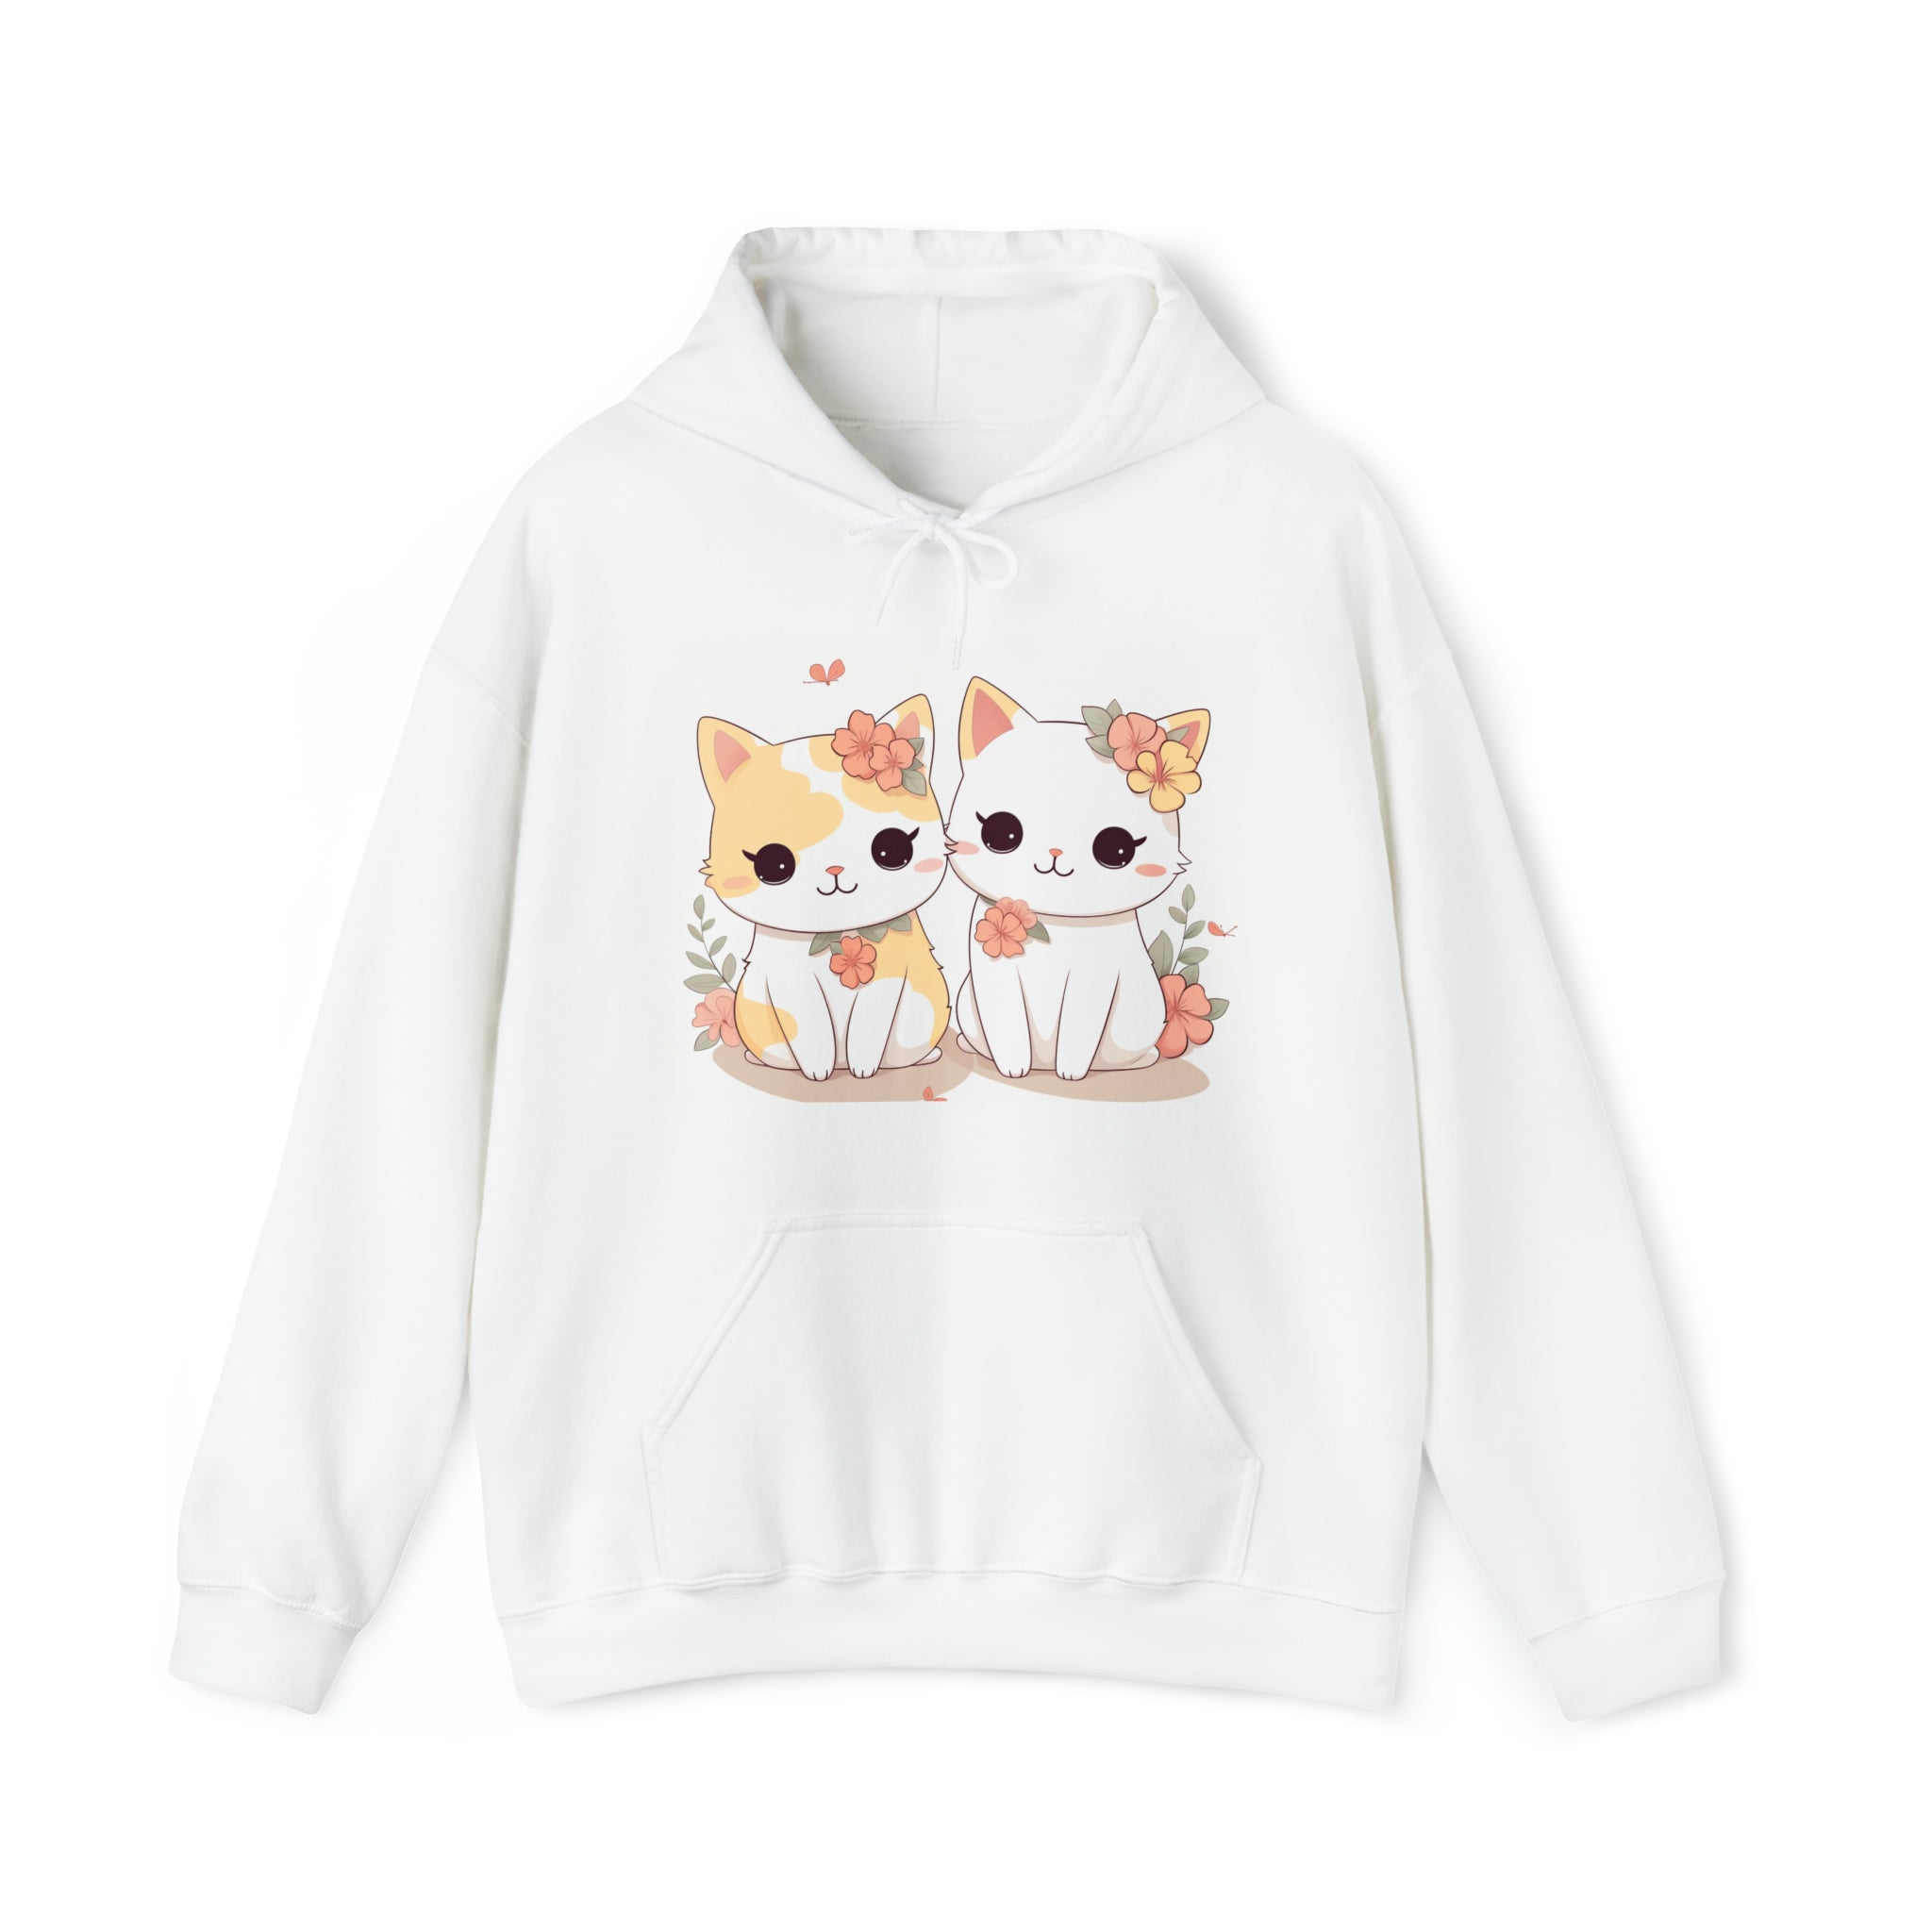 Cat Lovers Sweatshirt Hoodie | Perfect Birthday Gift for Wife or Girlfriend | Cute Kitten Pullover | Funny and Cozy Cat Themed Gift